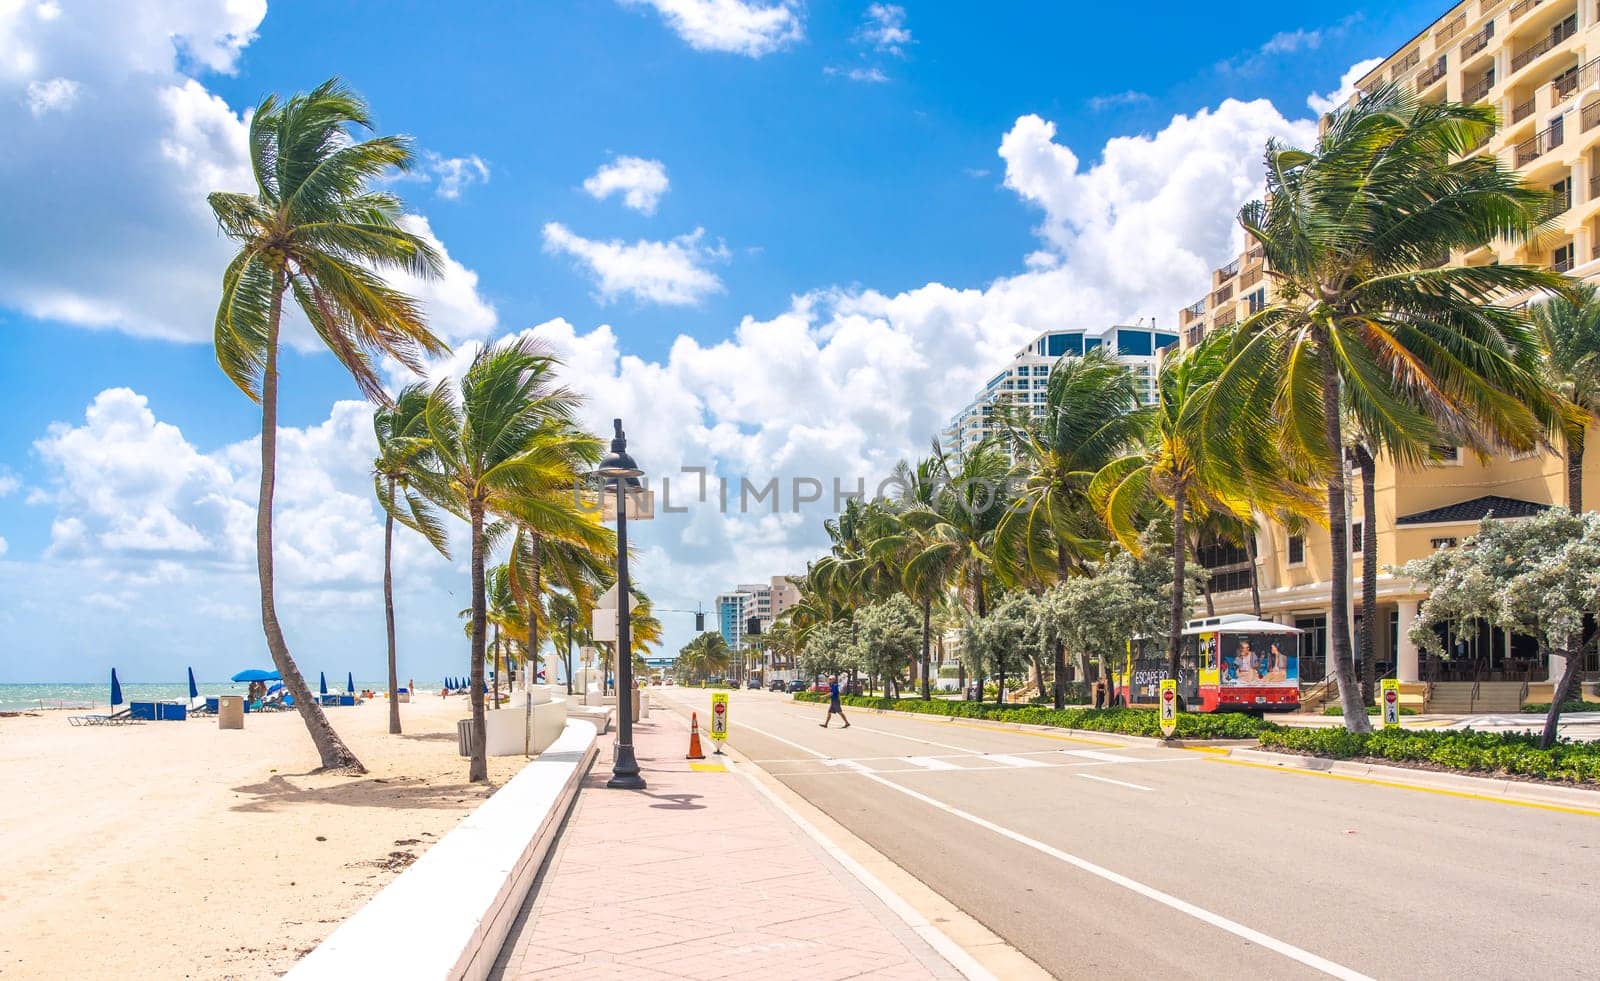 Beach promenade with palm trees on a sunny day in Fort Lauderdale by Mariakray